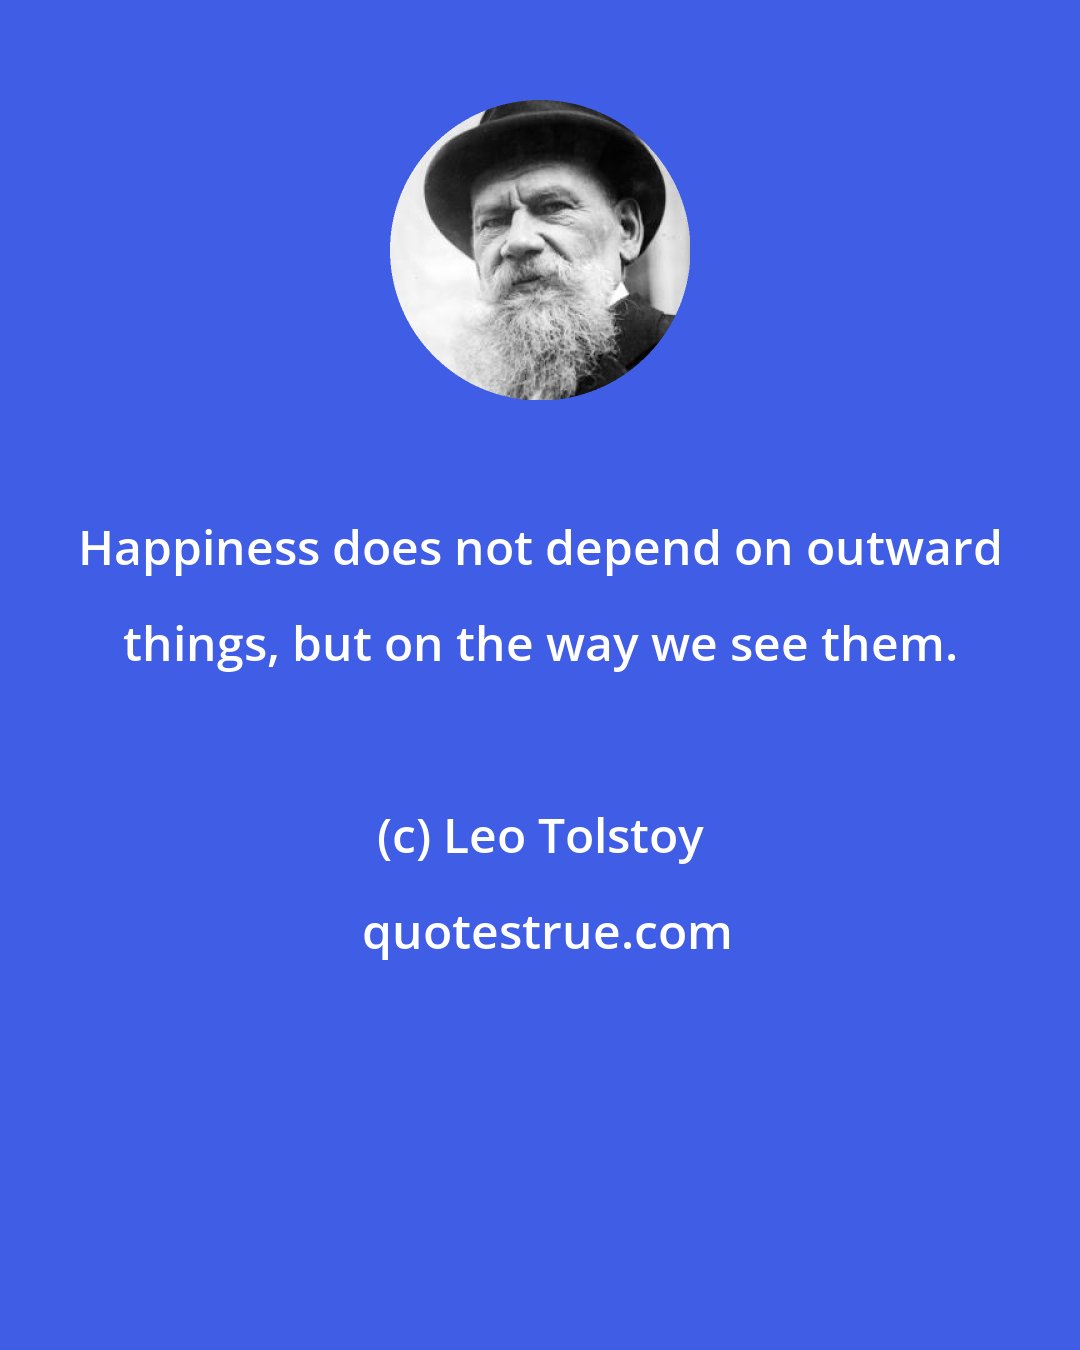 Leo Tolstoy: Happiness does not depend on outward things, but on the way we see them.